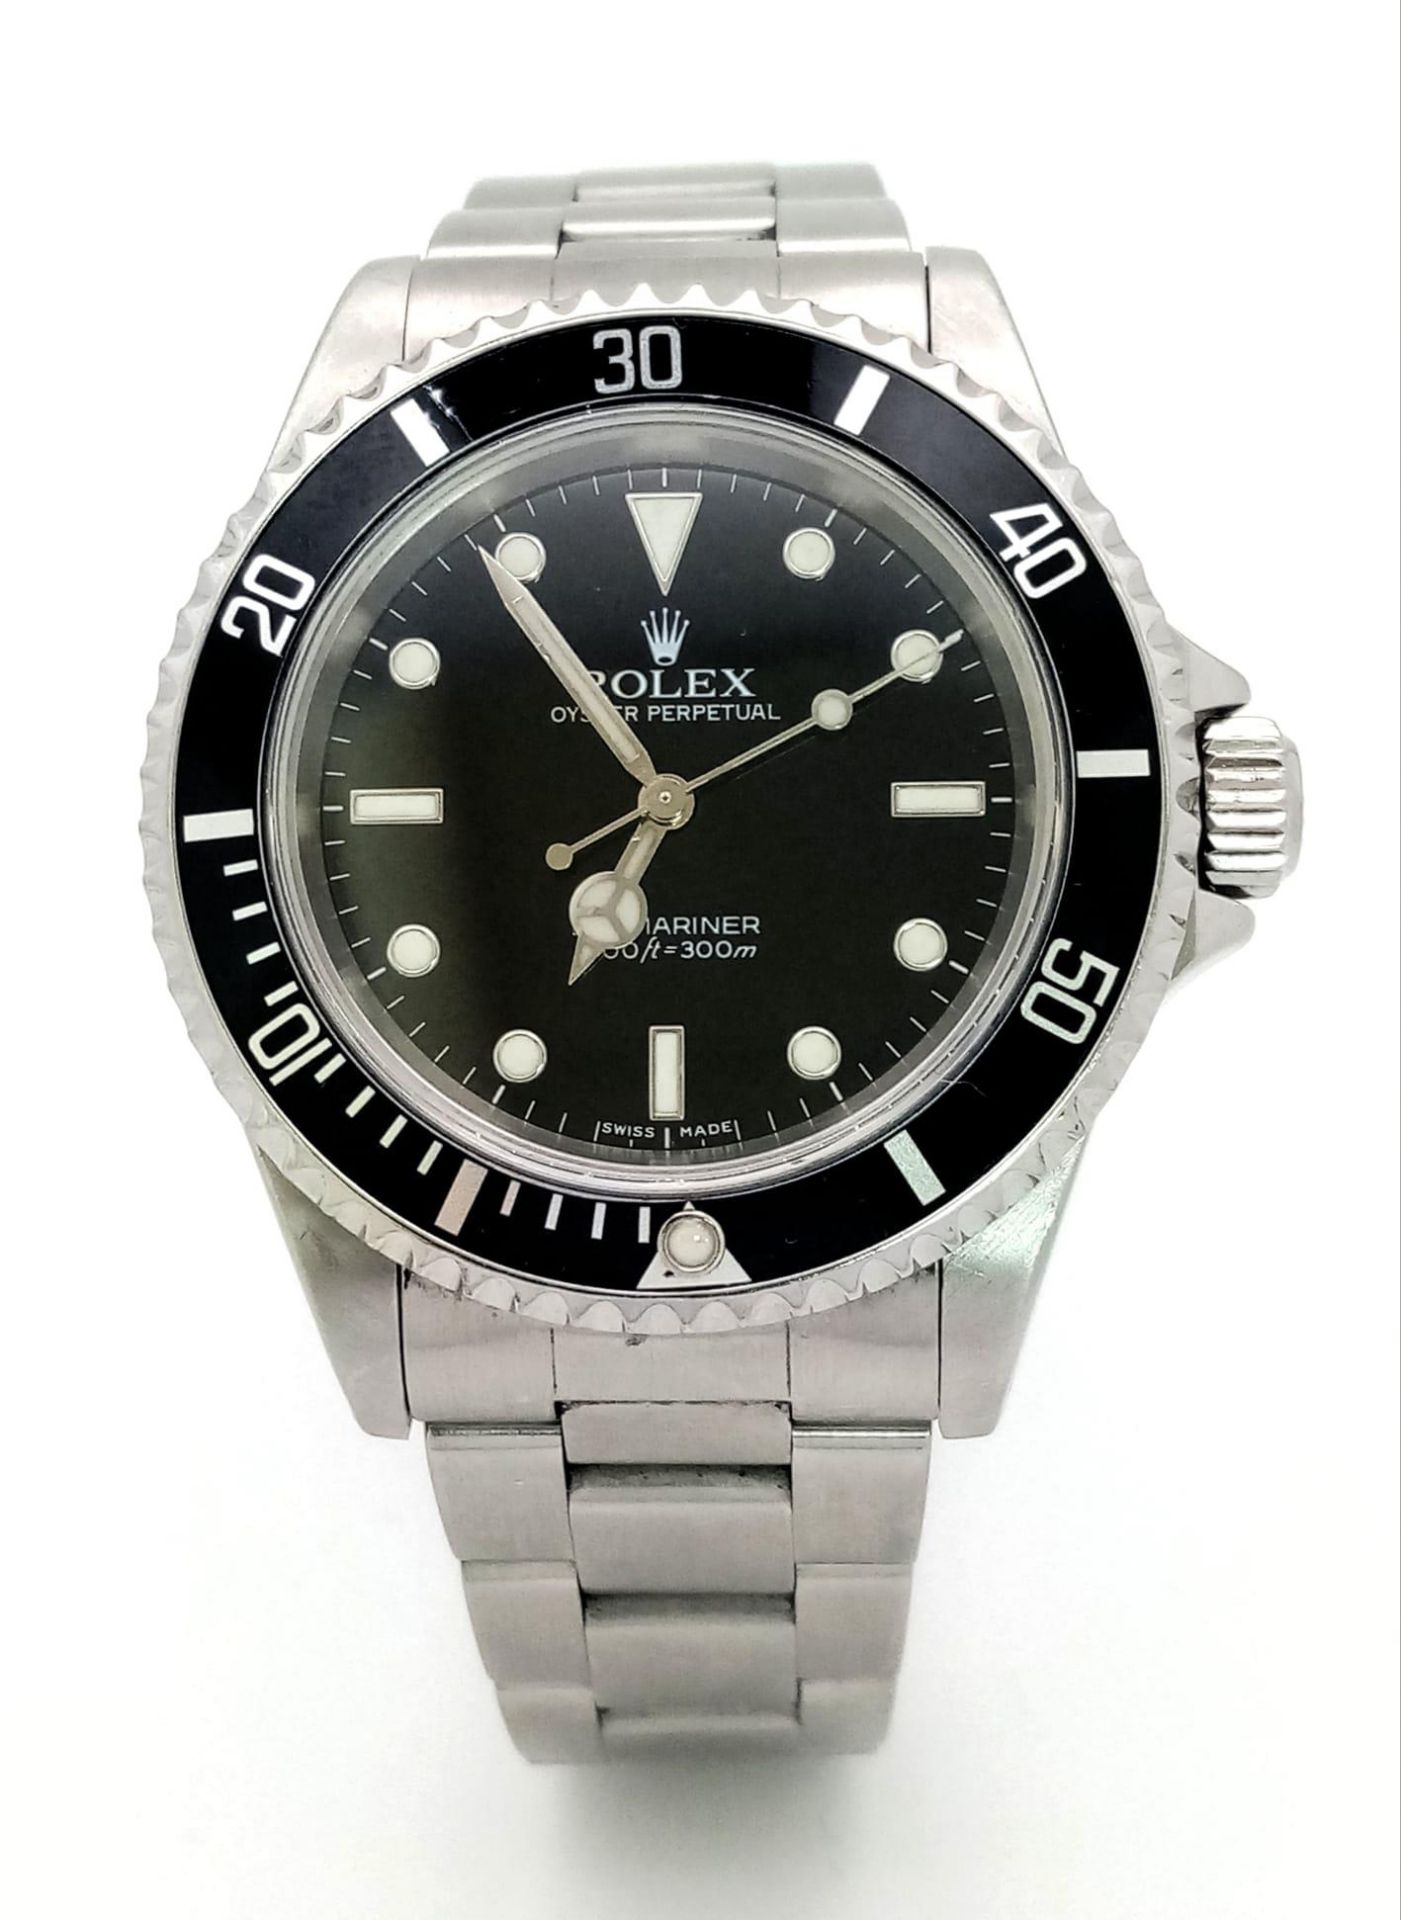 A stainless steel ROLEX OYSTER PERPETUAL SUBMARINER 1000ft/300m diver's watch. Case 40 mm, black